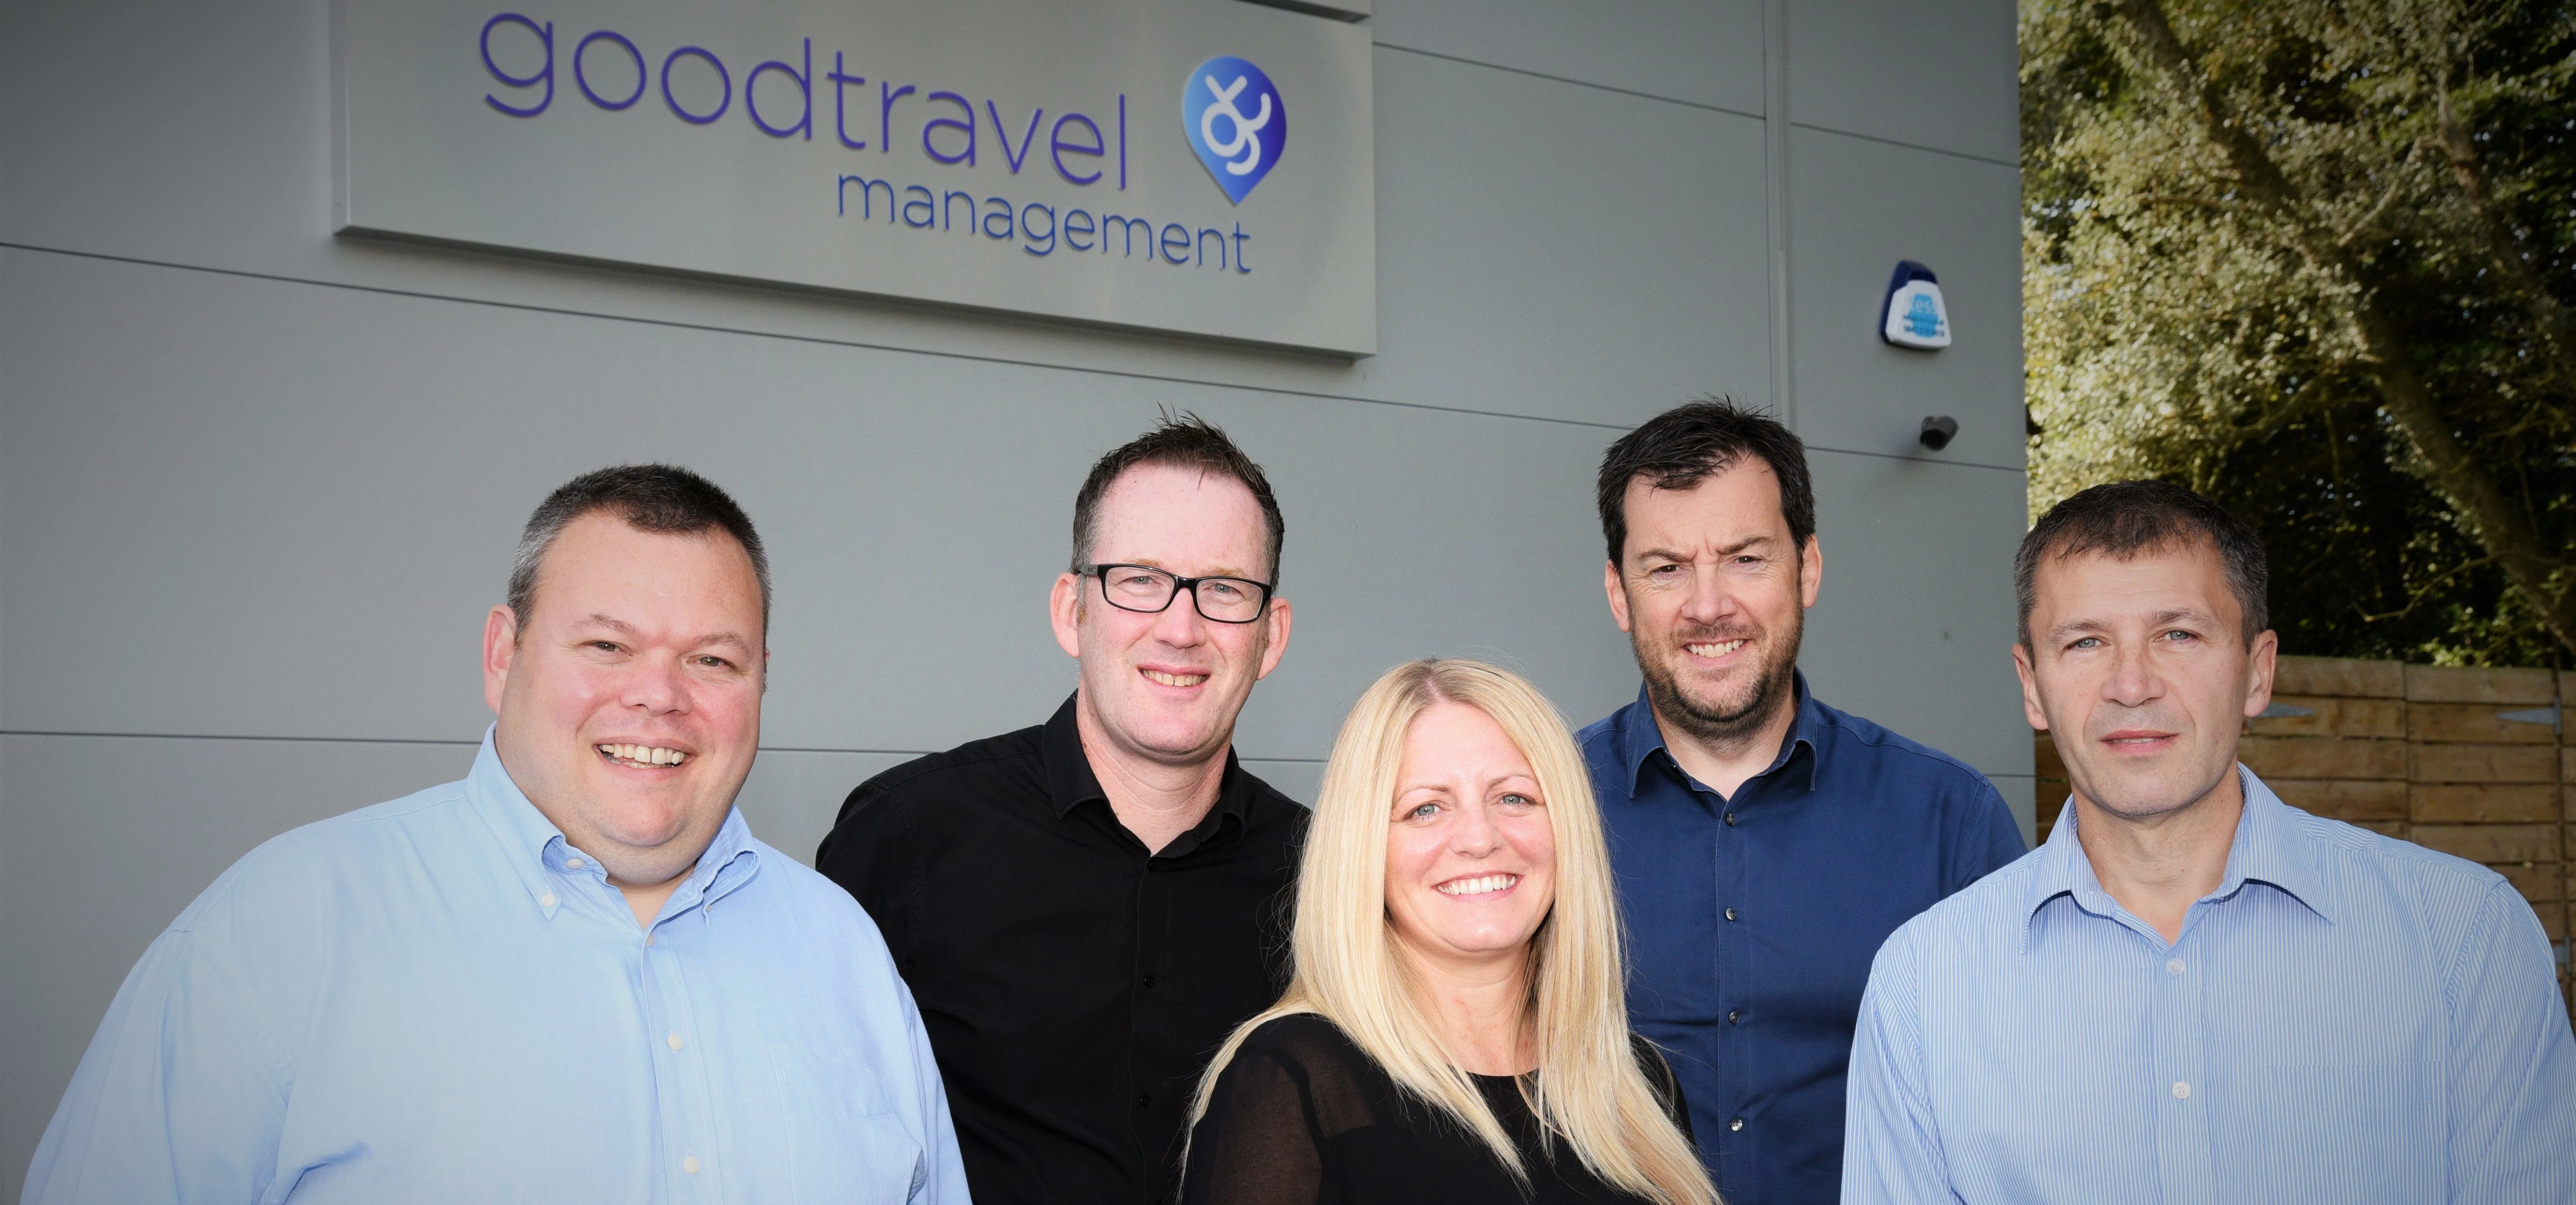 Good Travel Management - from left to right – Wayne Durkin, Kevin Harrison, Julie Ornsby, David Nort